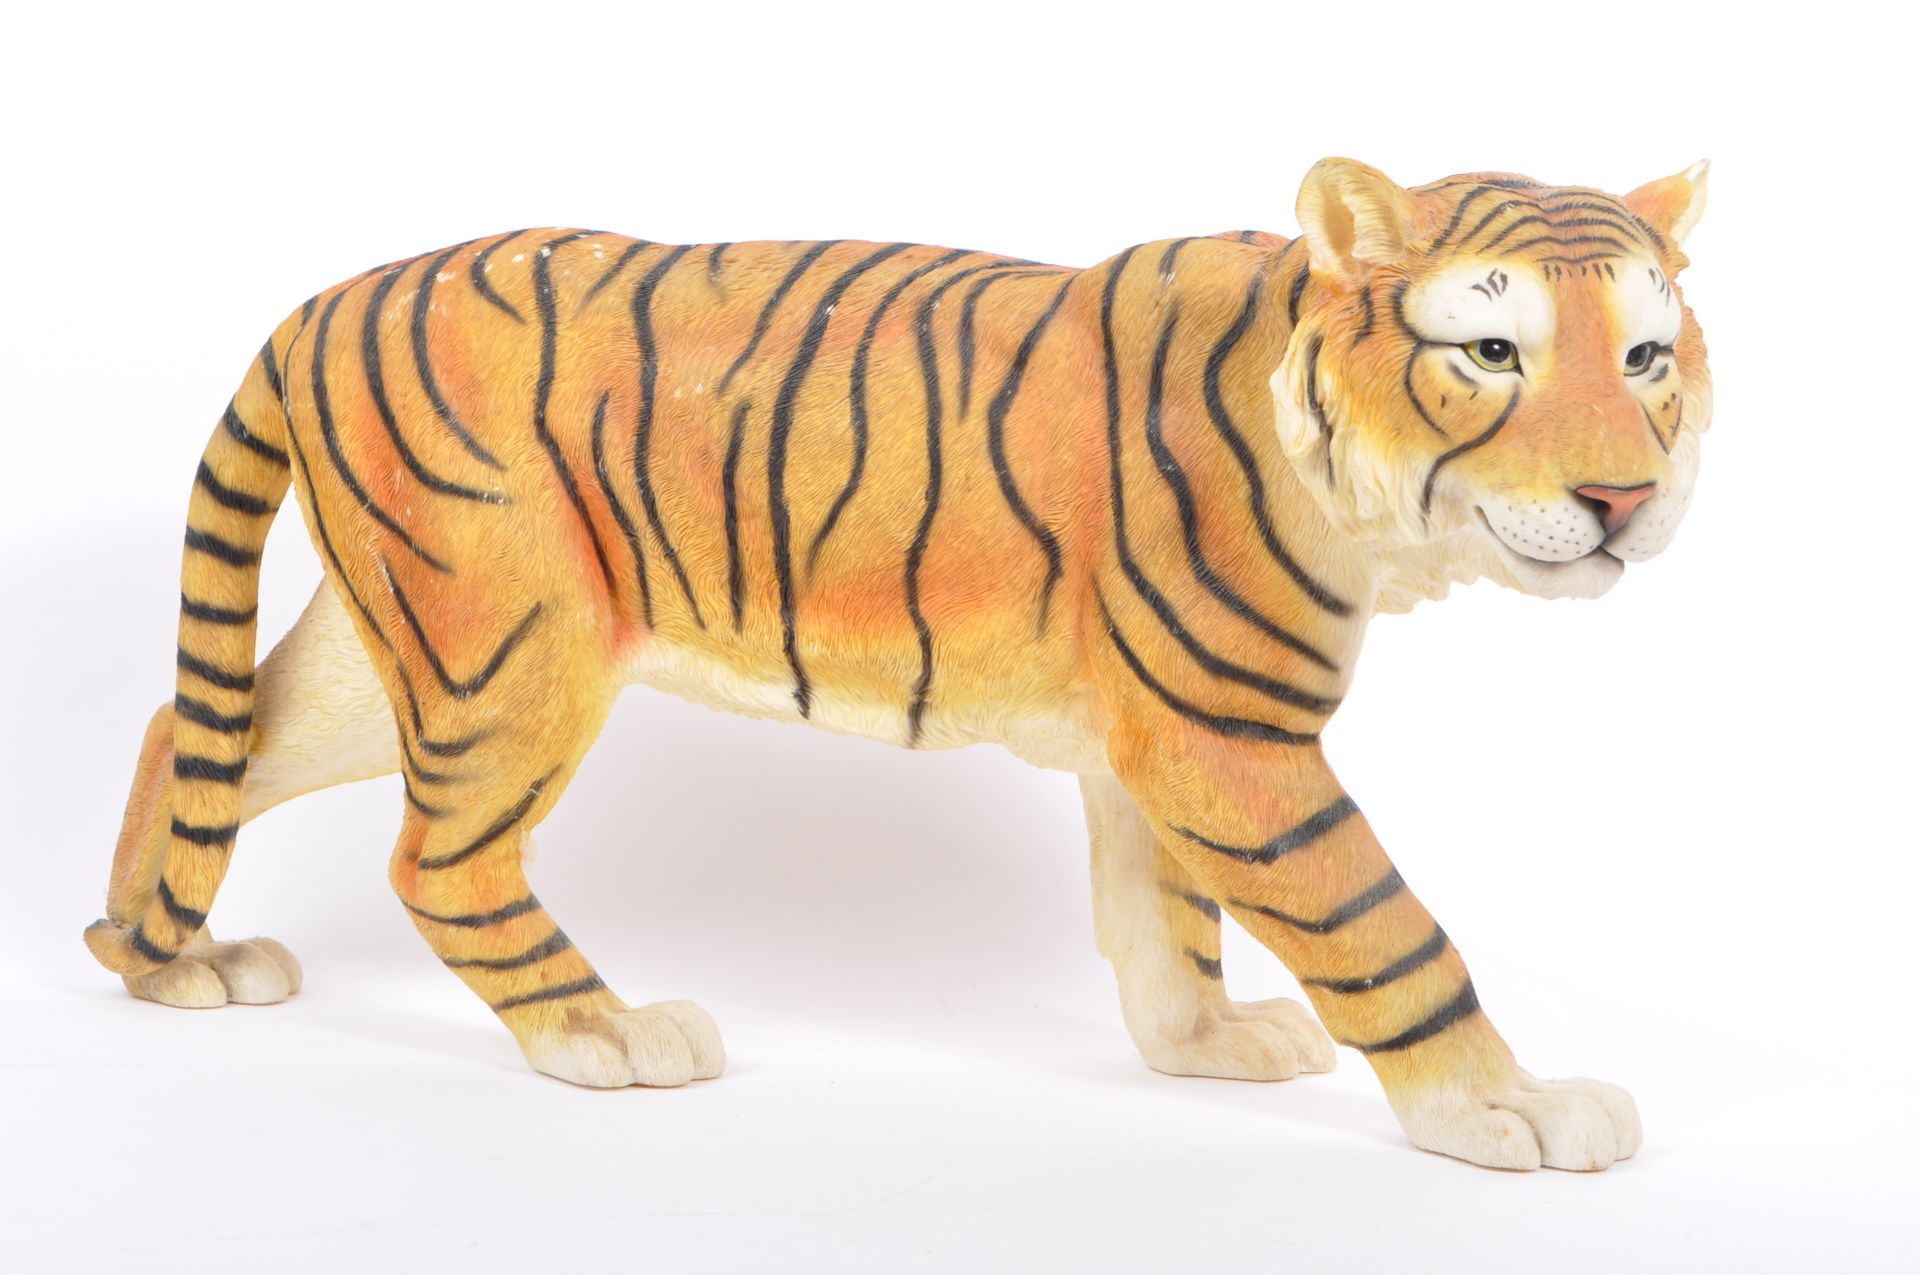 COLLECTION OF OF RESIN TIGER FIGURINES BY THE JULIANA COLLECTION - Image 4 of 13